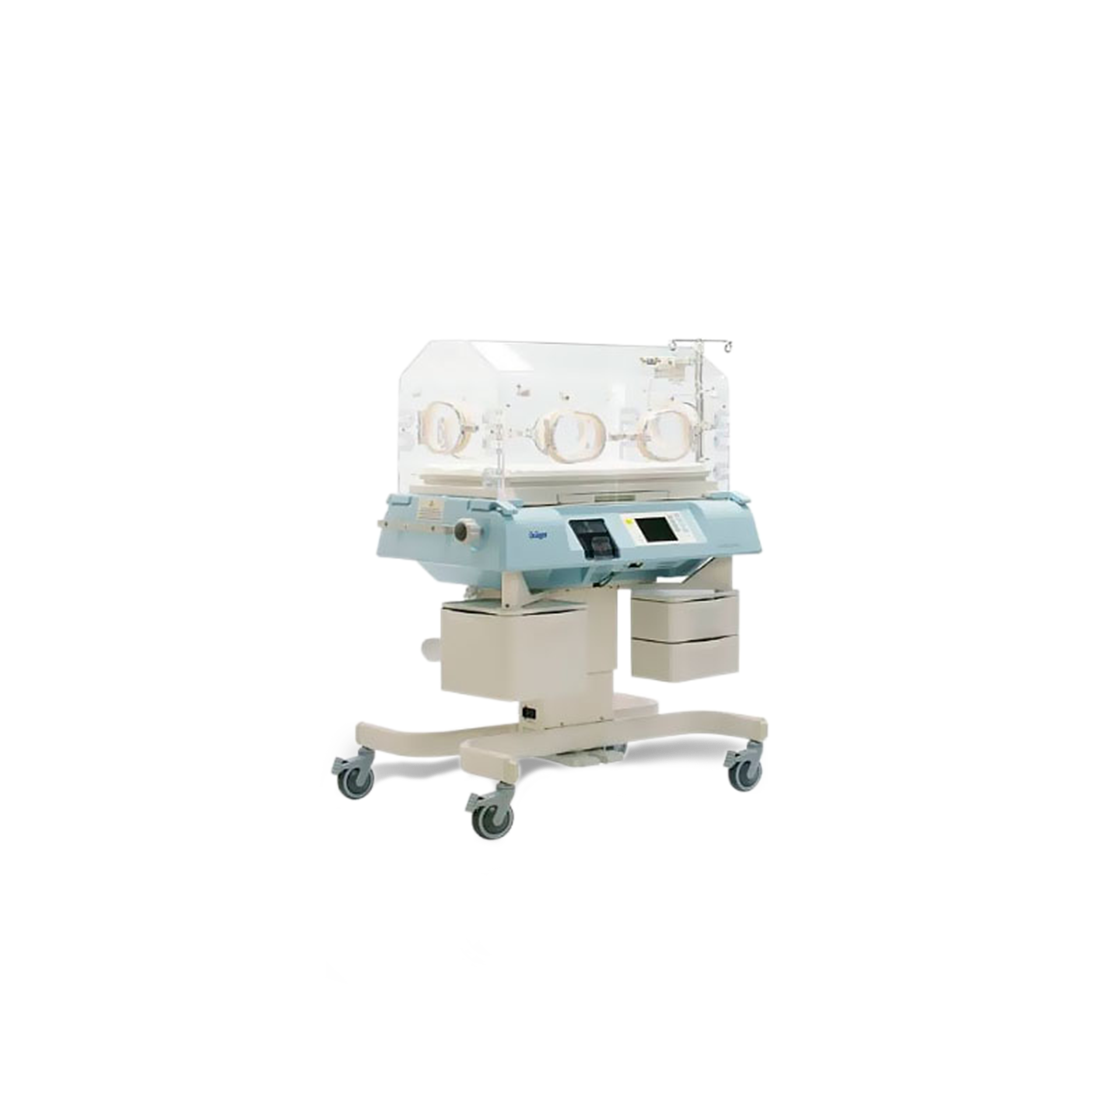 Drager Air Shields C300 Infant Incubator